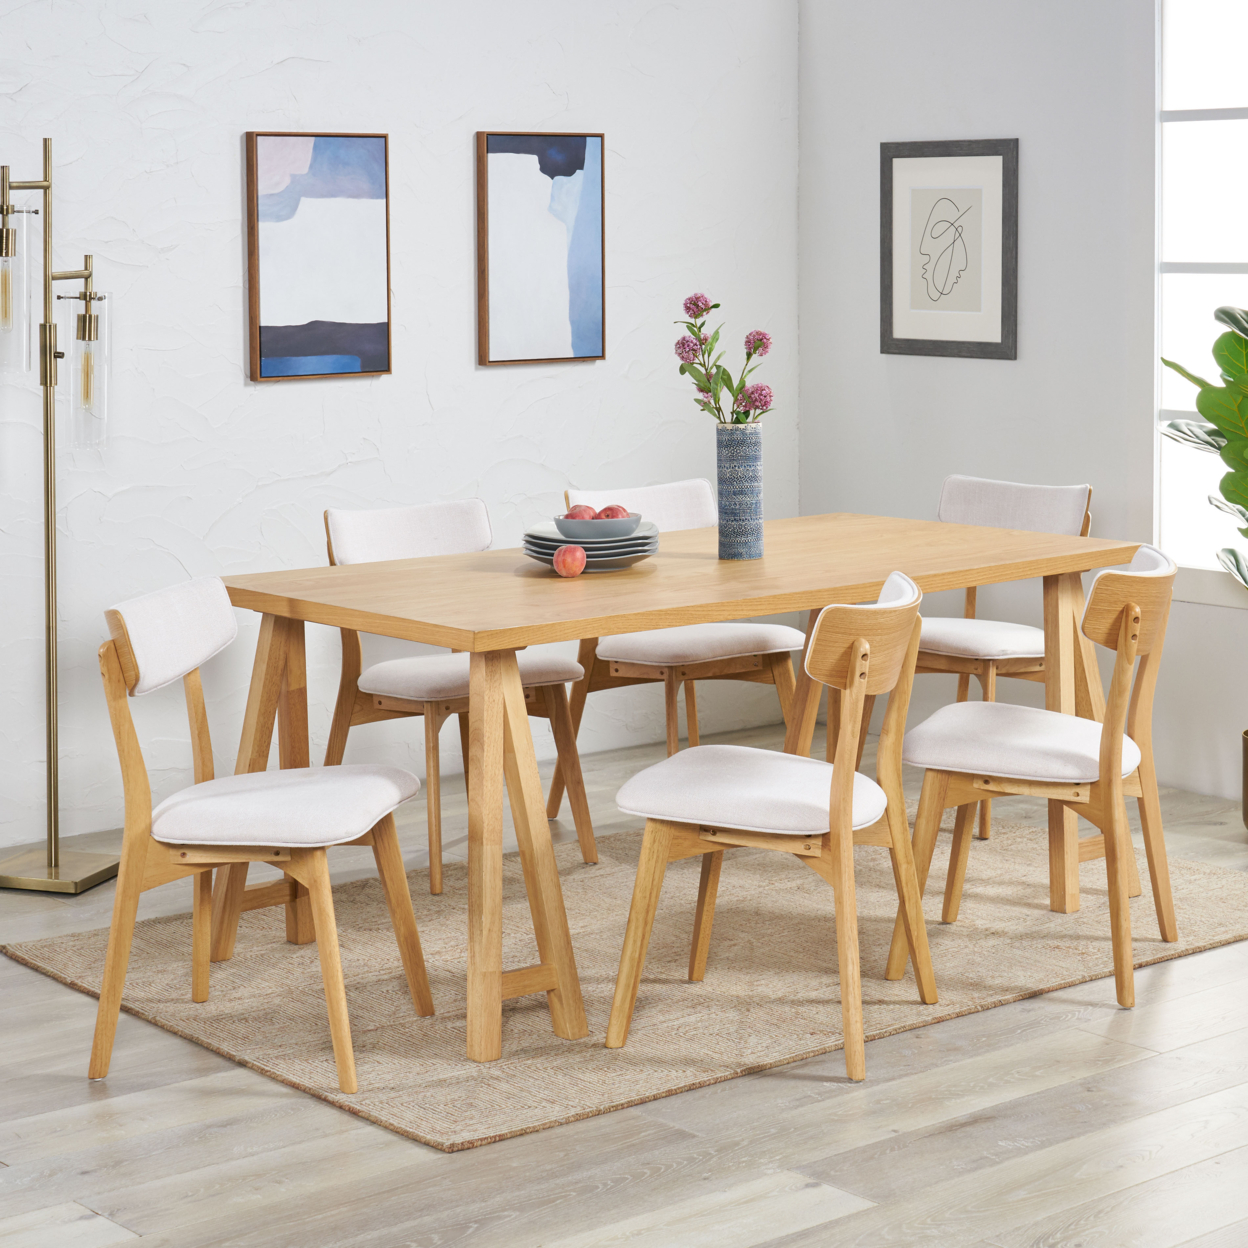 Turat Mid-Century Modern 7 Piece Dining Set With A-Frame Table - Natural Oak/green Tea